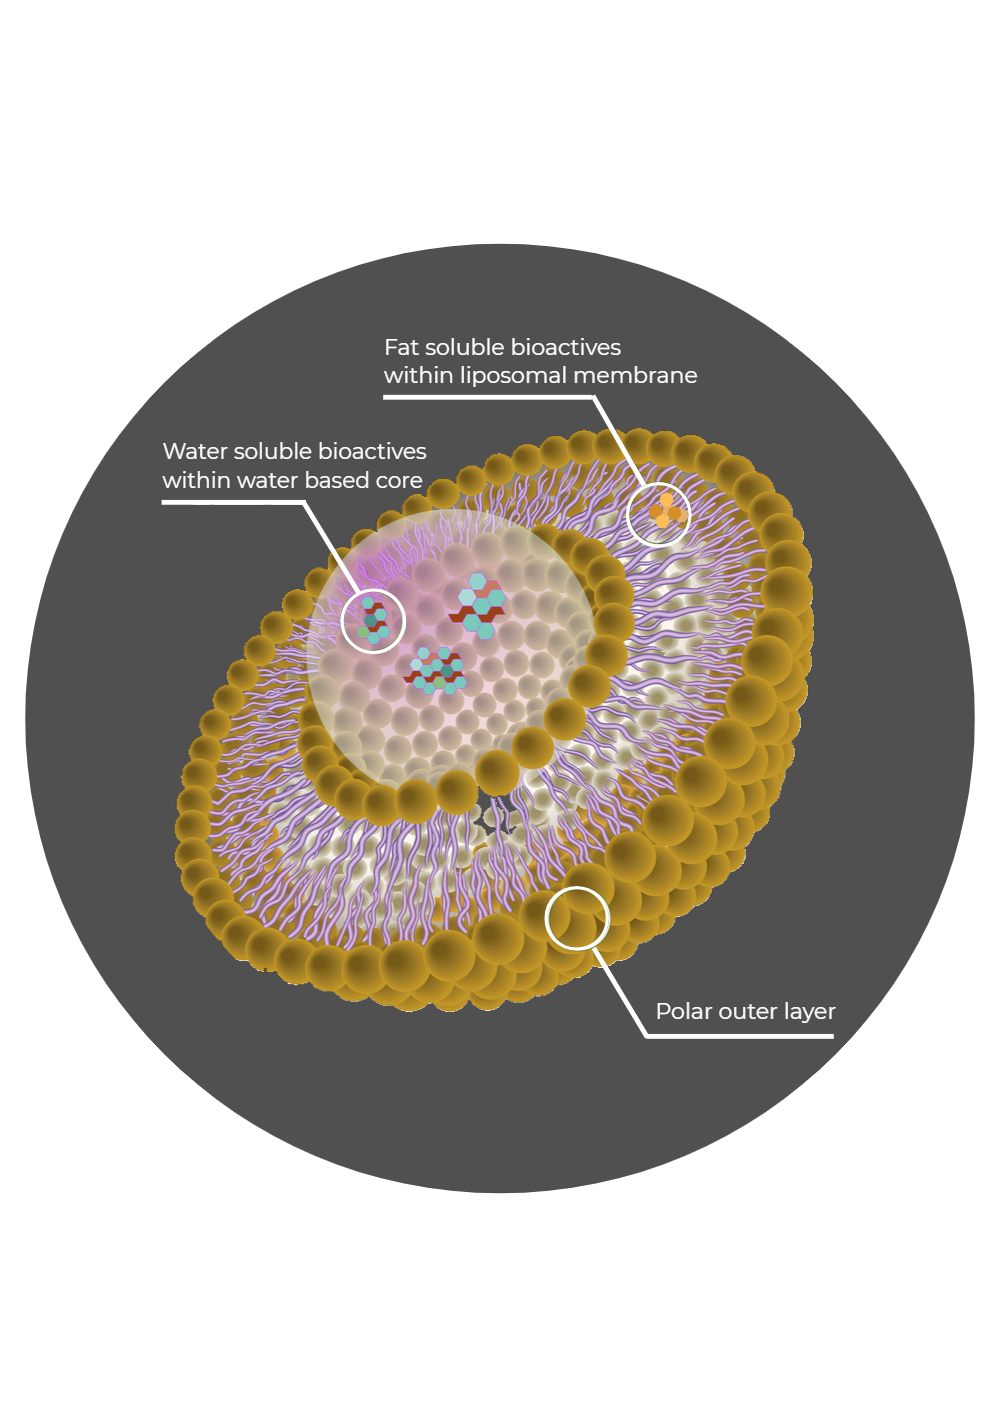 a liposome fat and water soluble bioactive